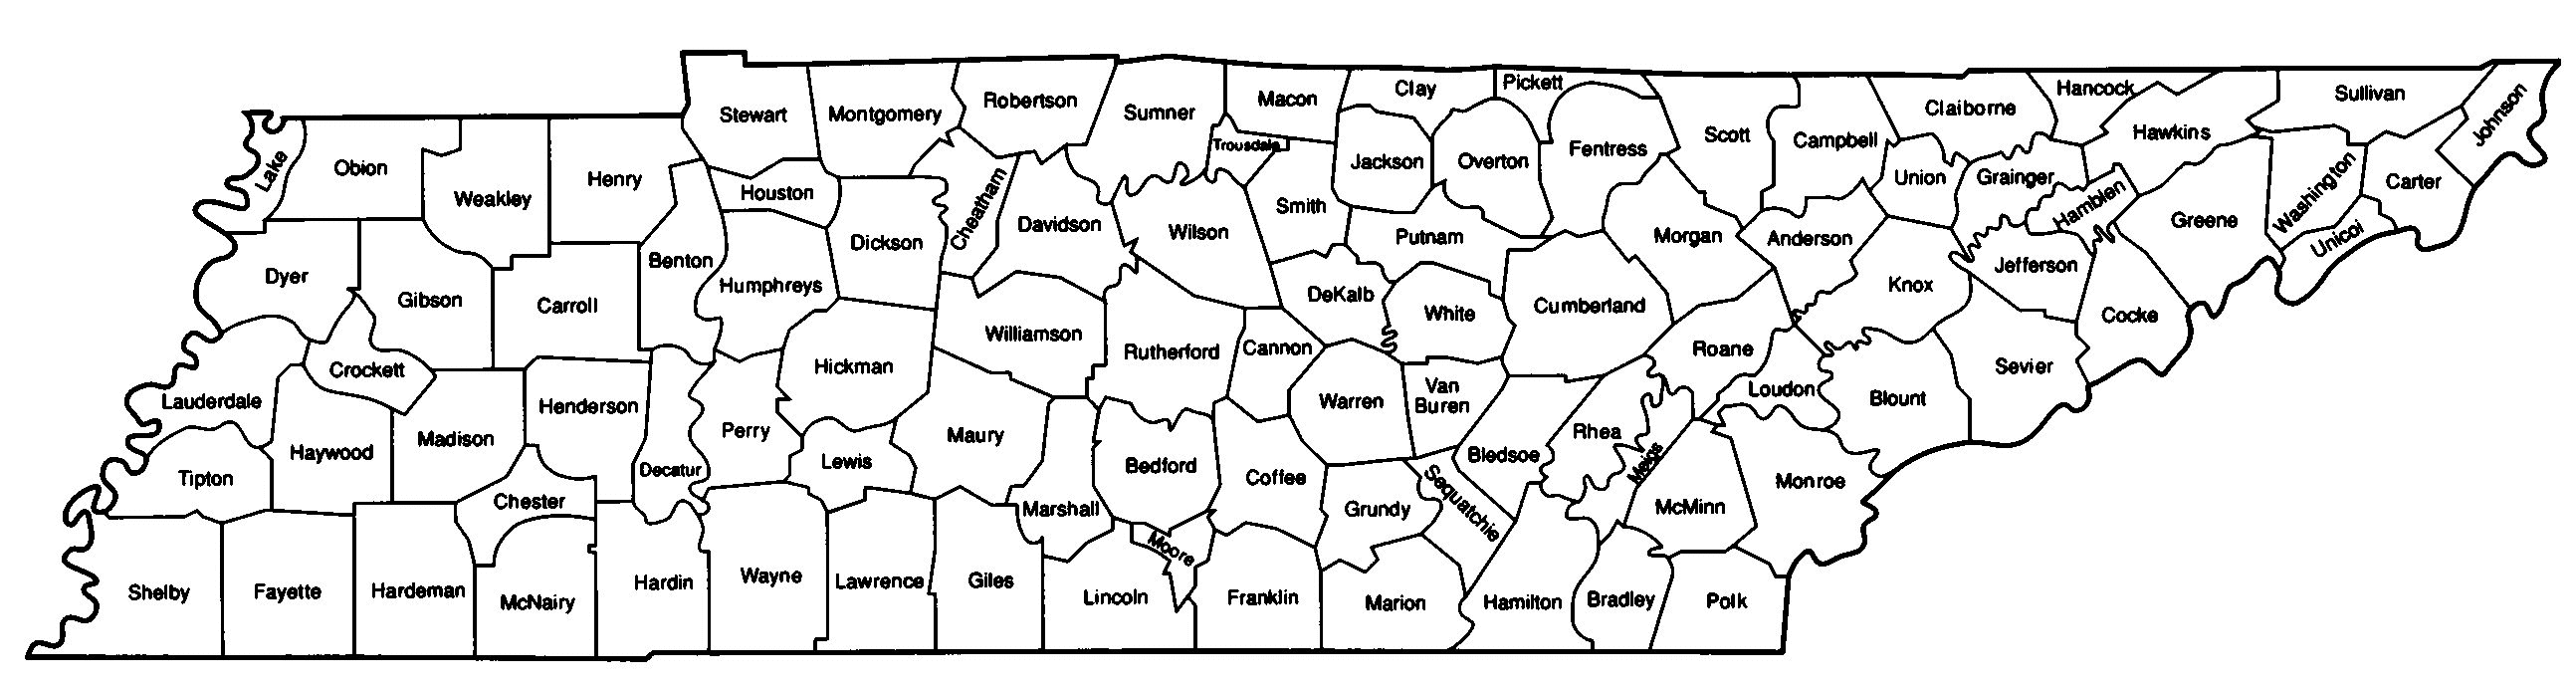 Where can you get a map of the counties in Tennessee?